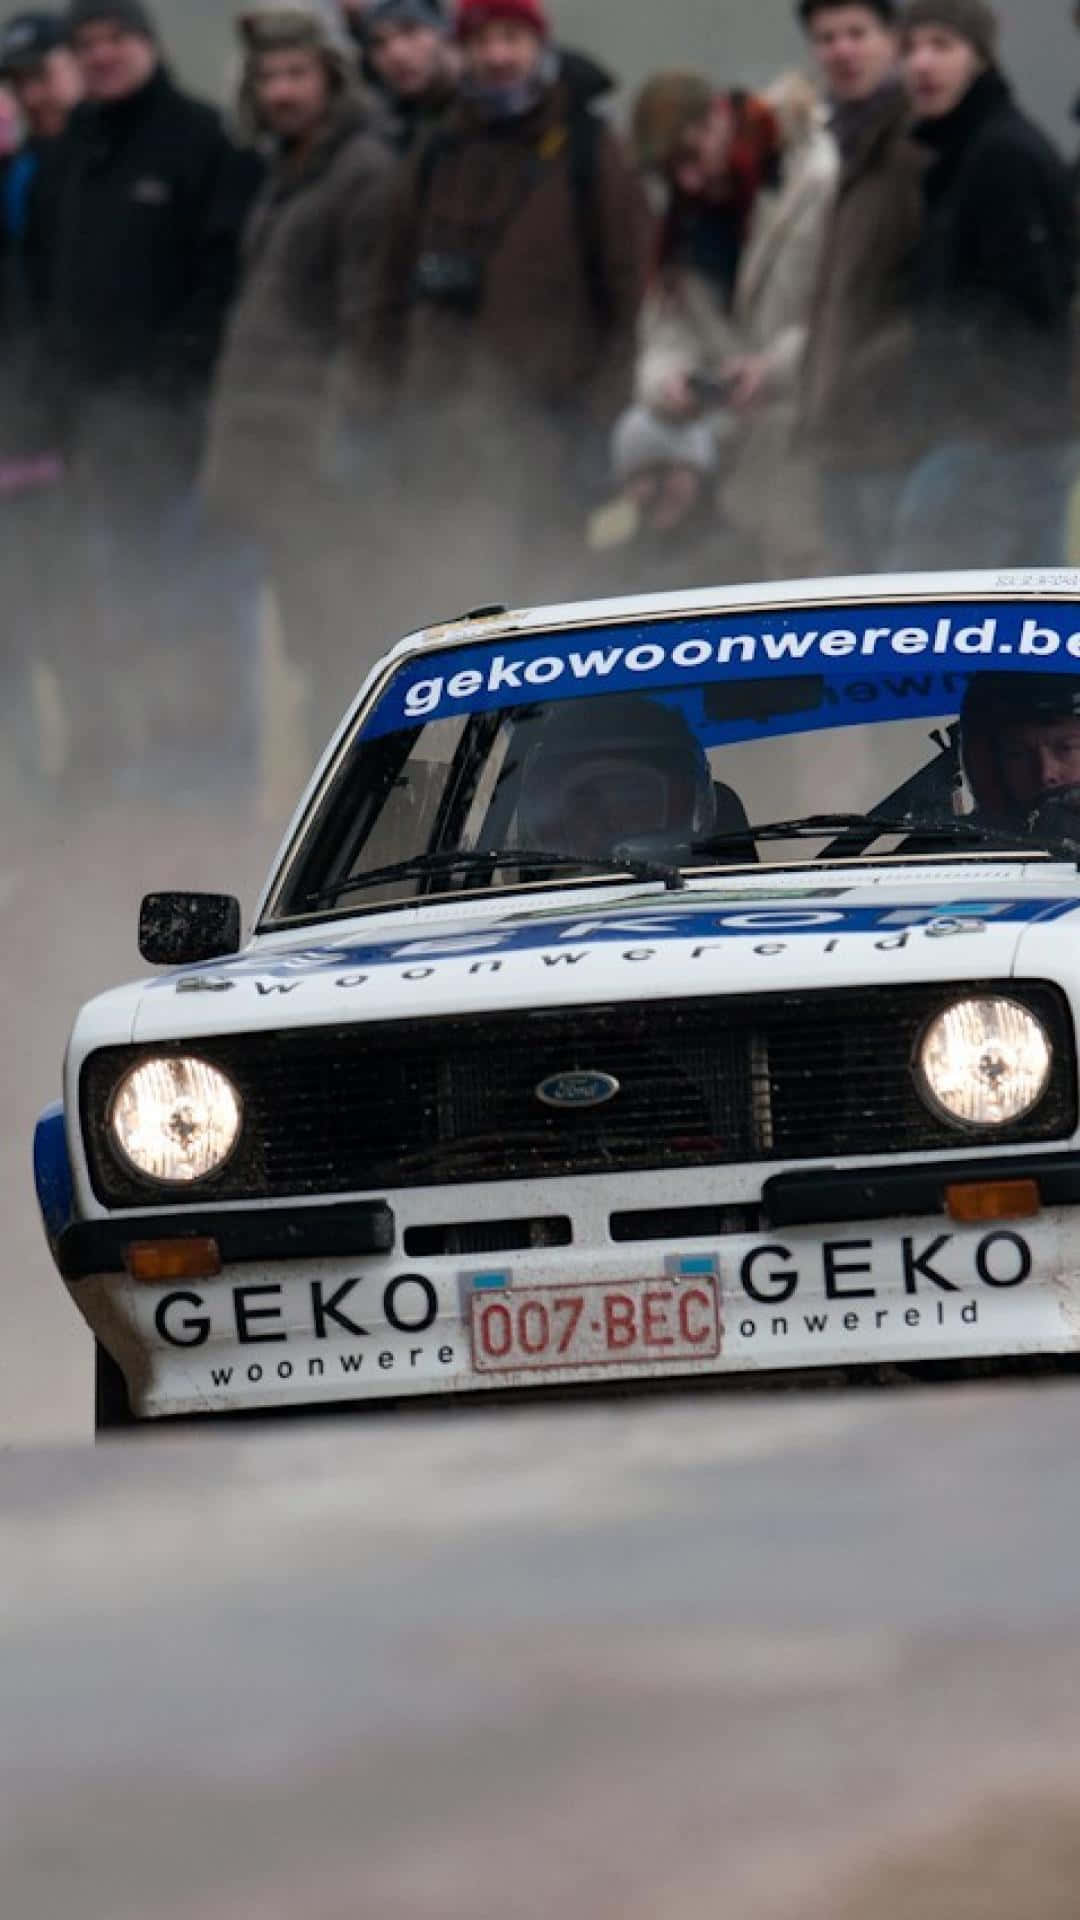 Classic Ford Escort in Action Wallpaper